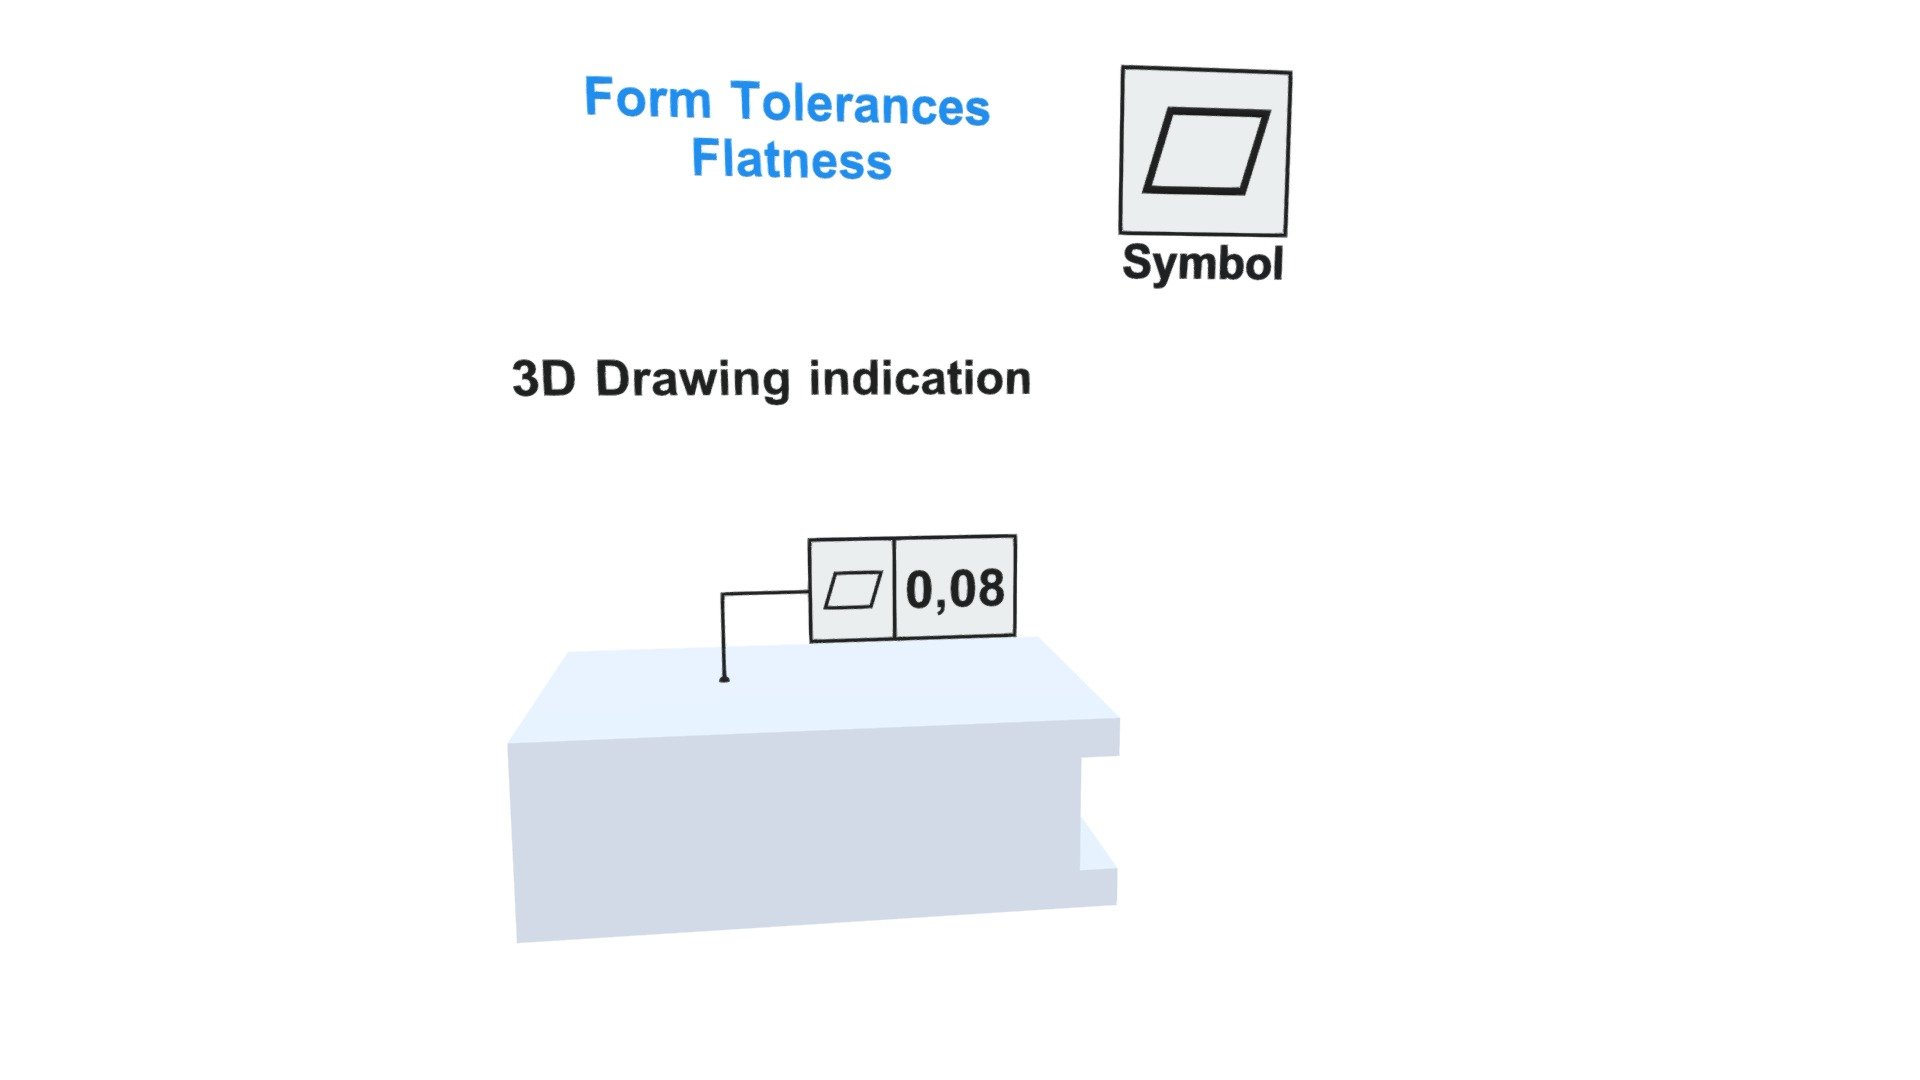 3D Drawing indication - Flatness